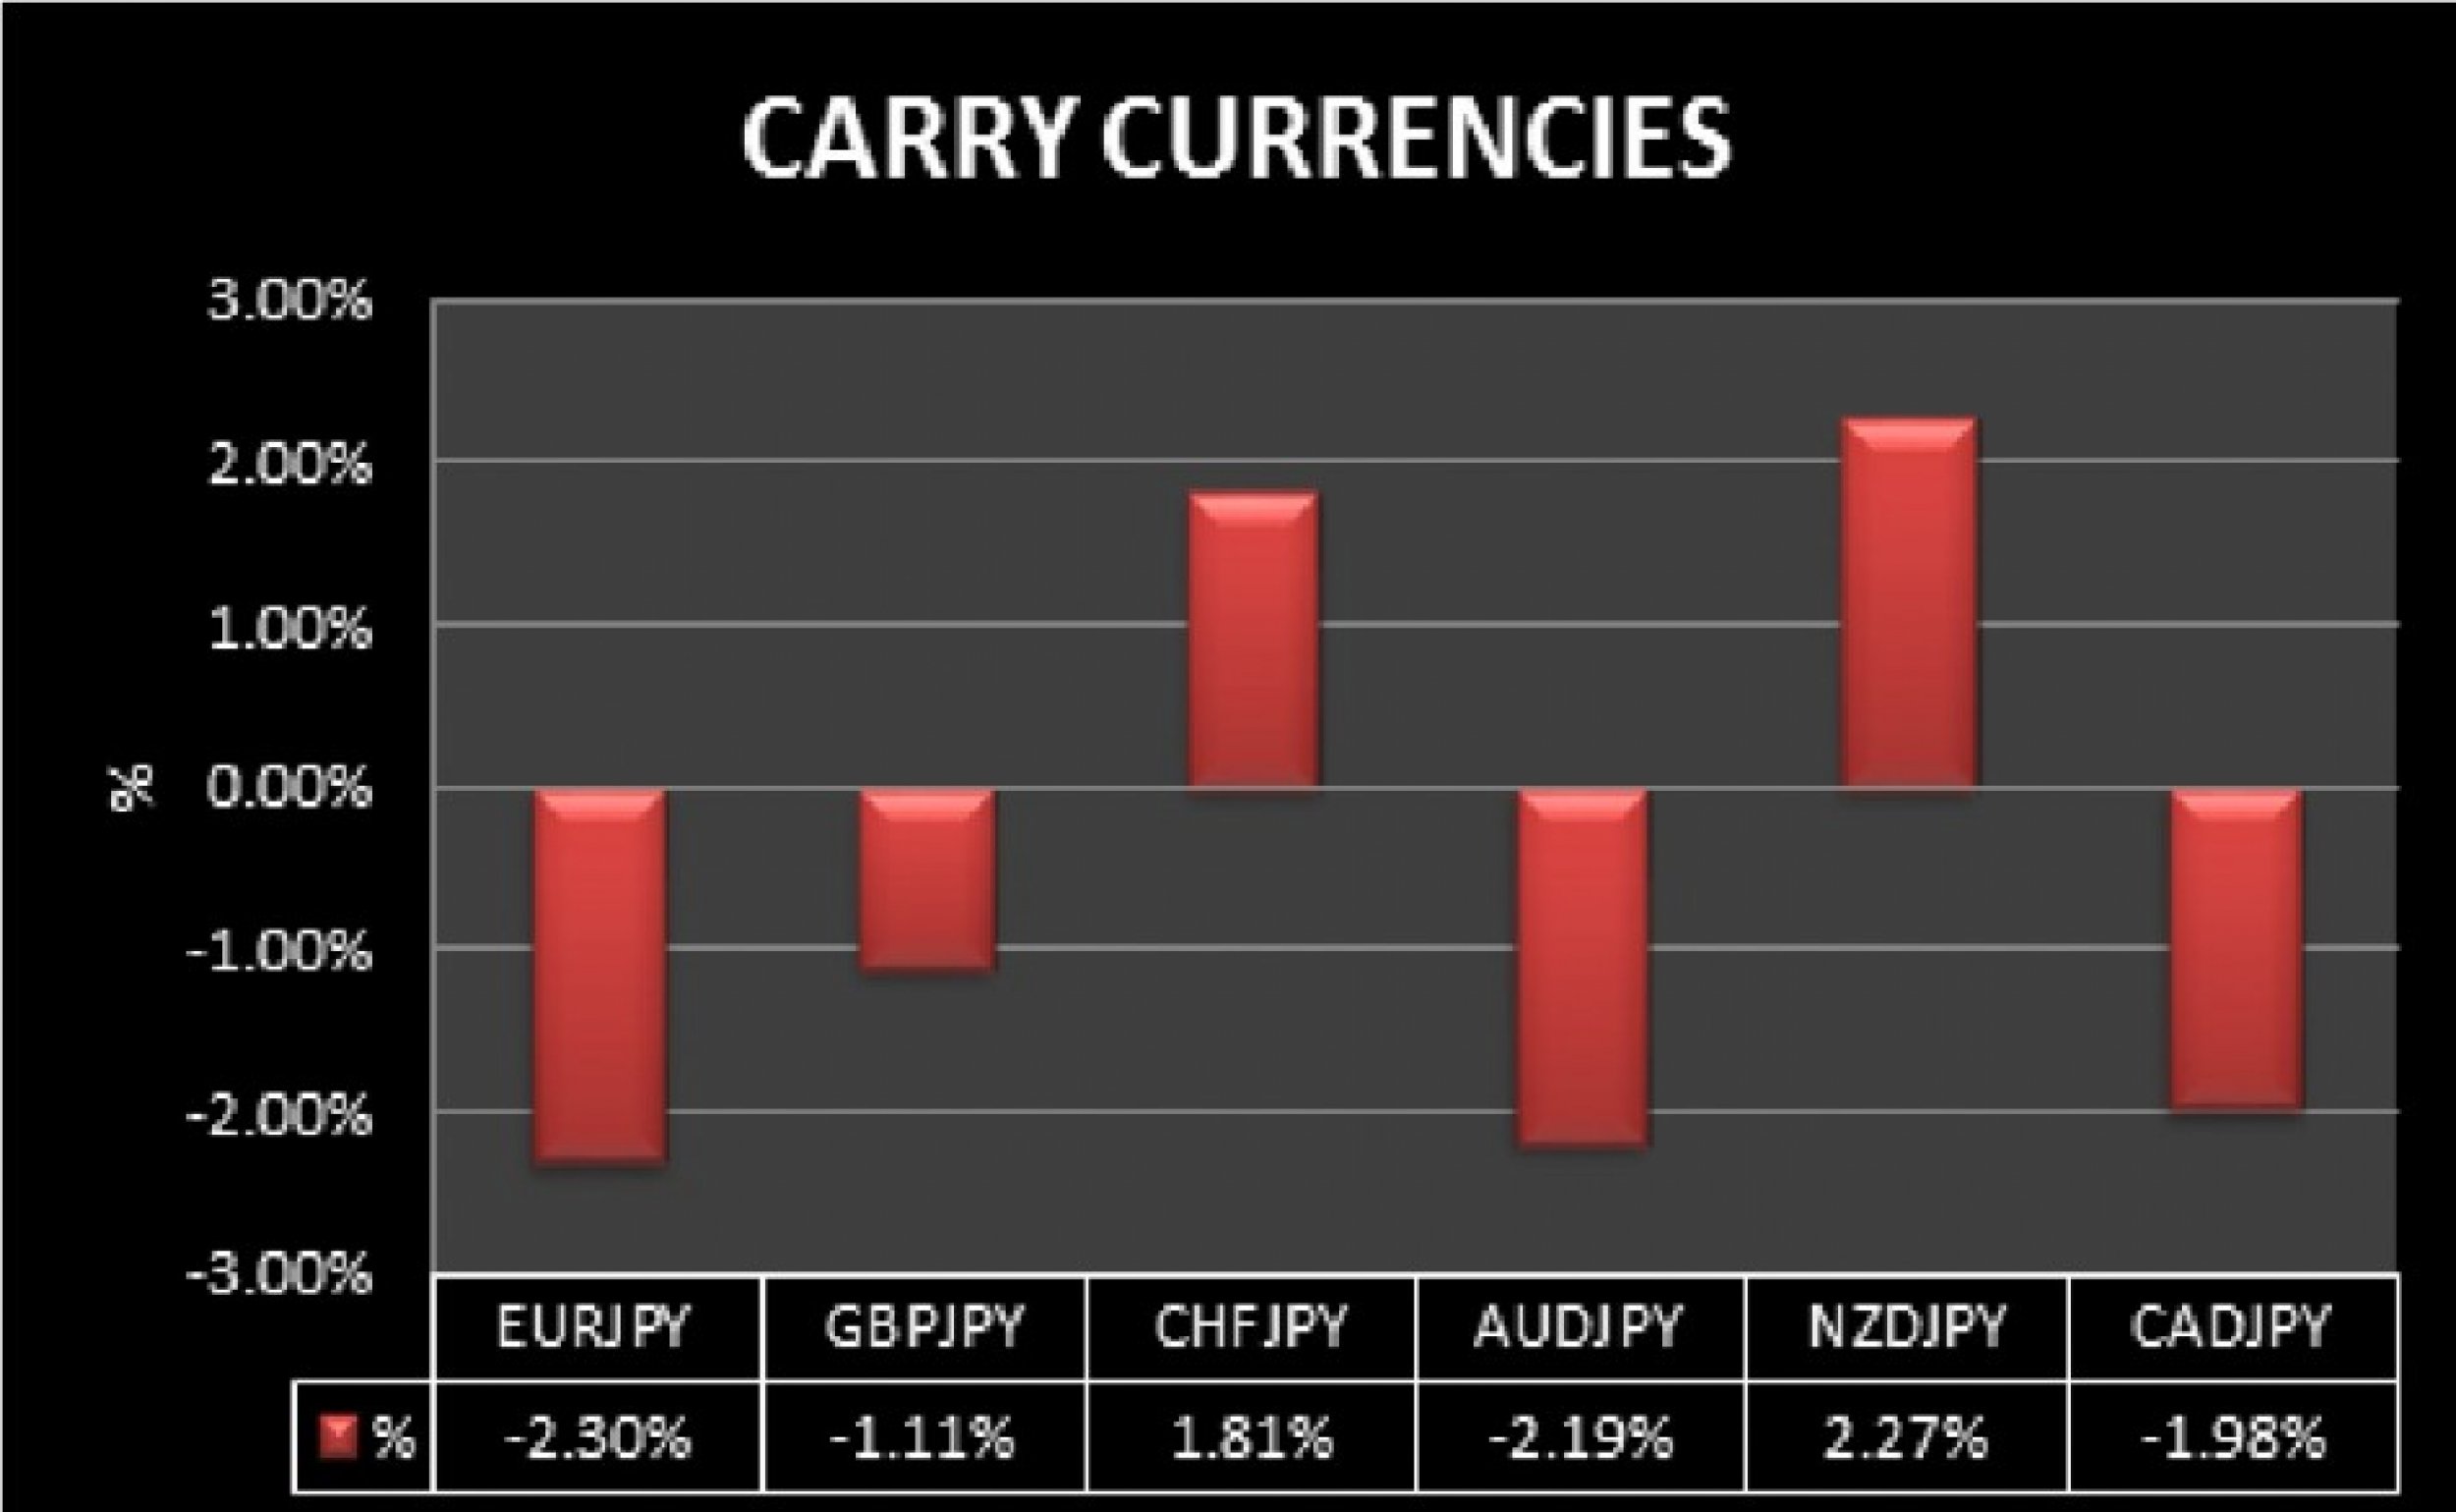 Carry Currencies - Month of May